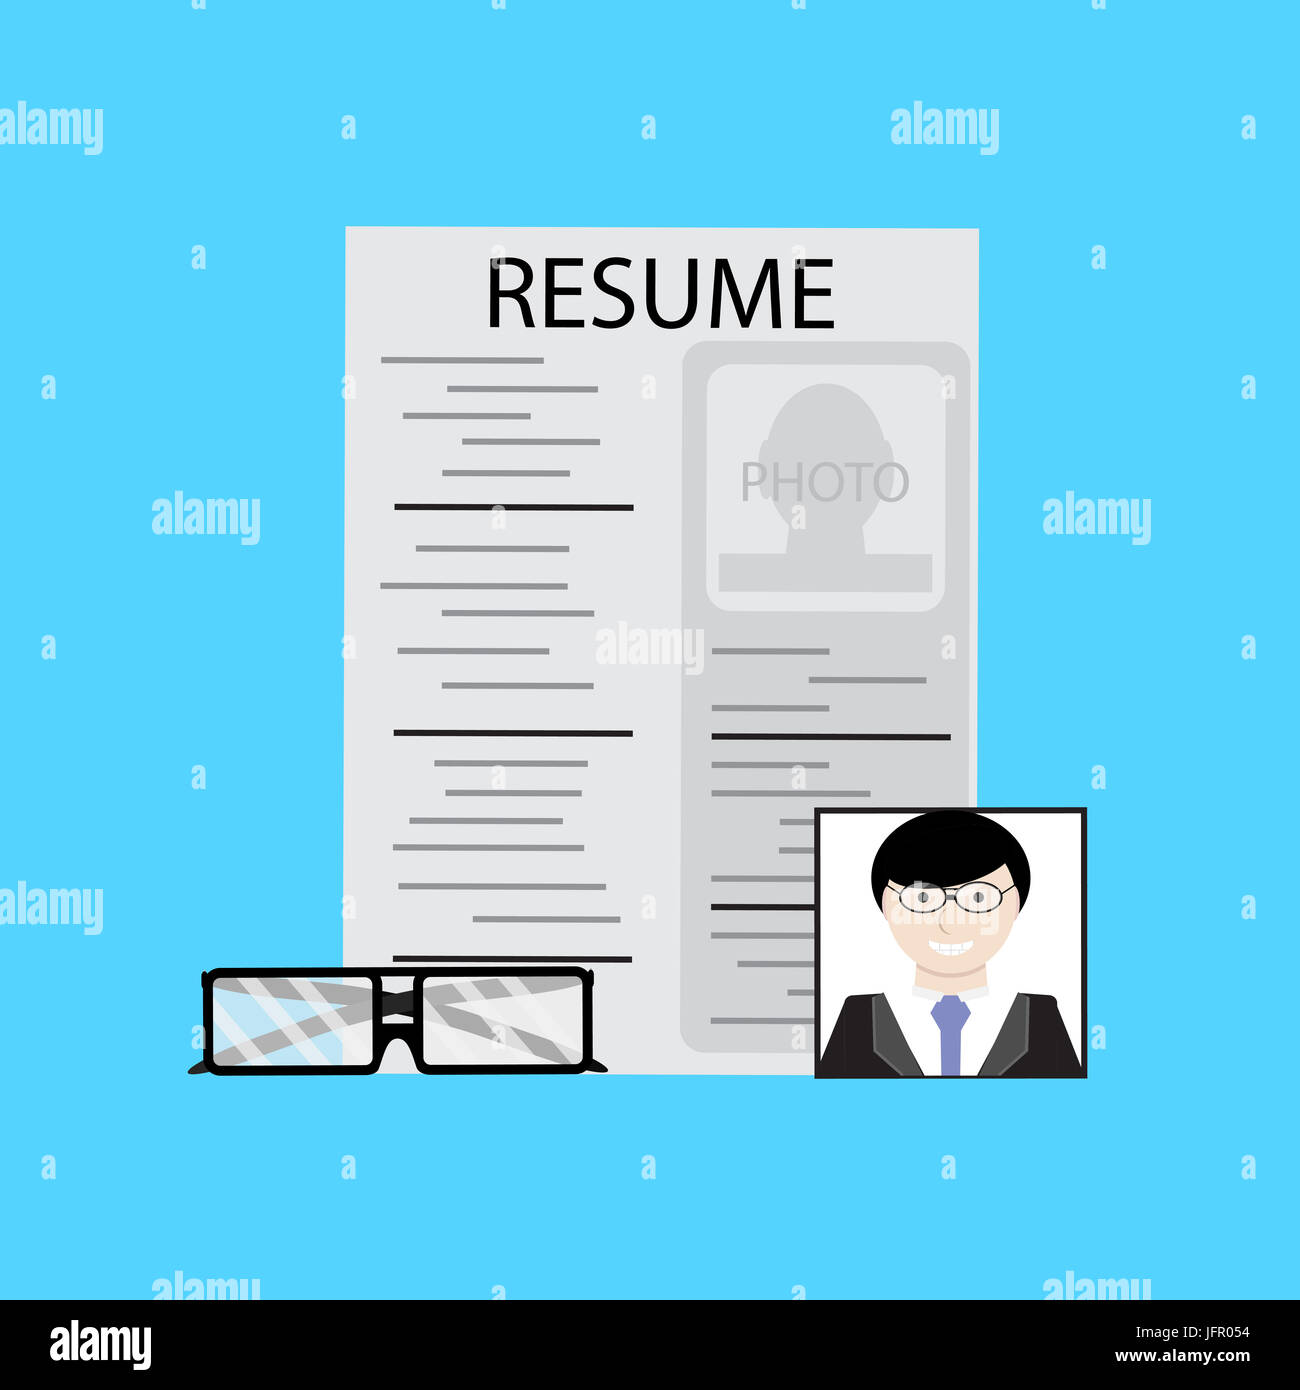 Employment, job candidate. Job interview and hiring, vector job search, illustration of employment and recruitment Stock Photo